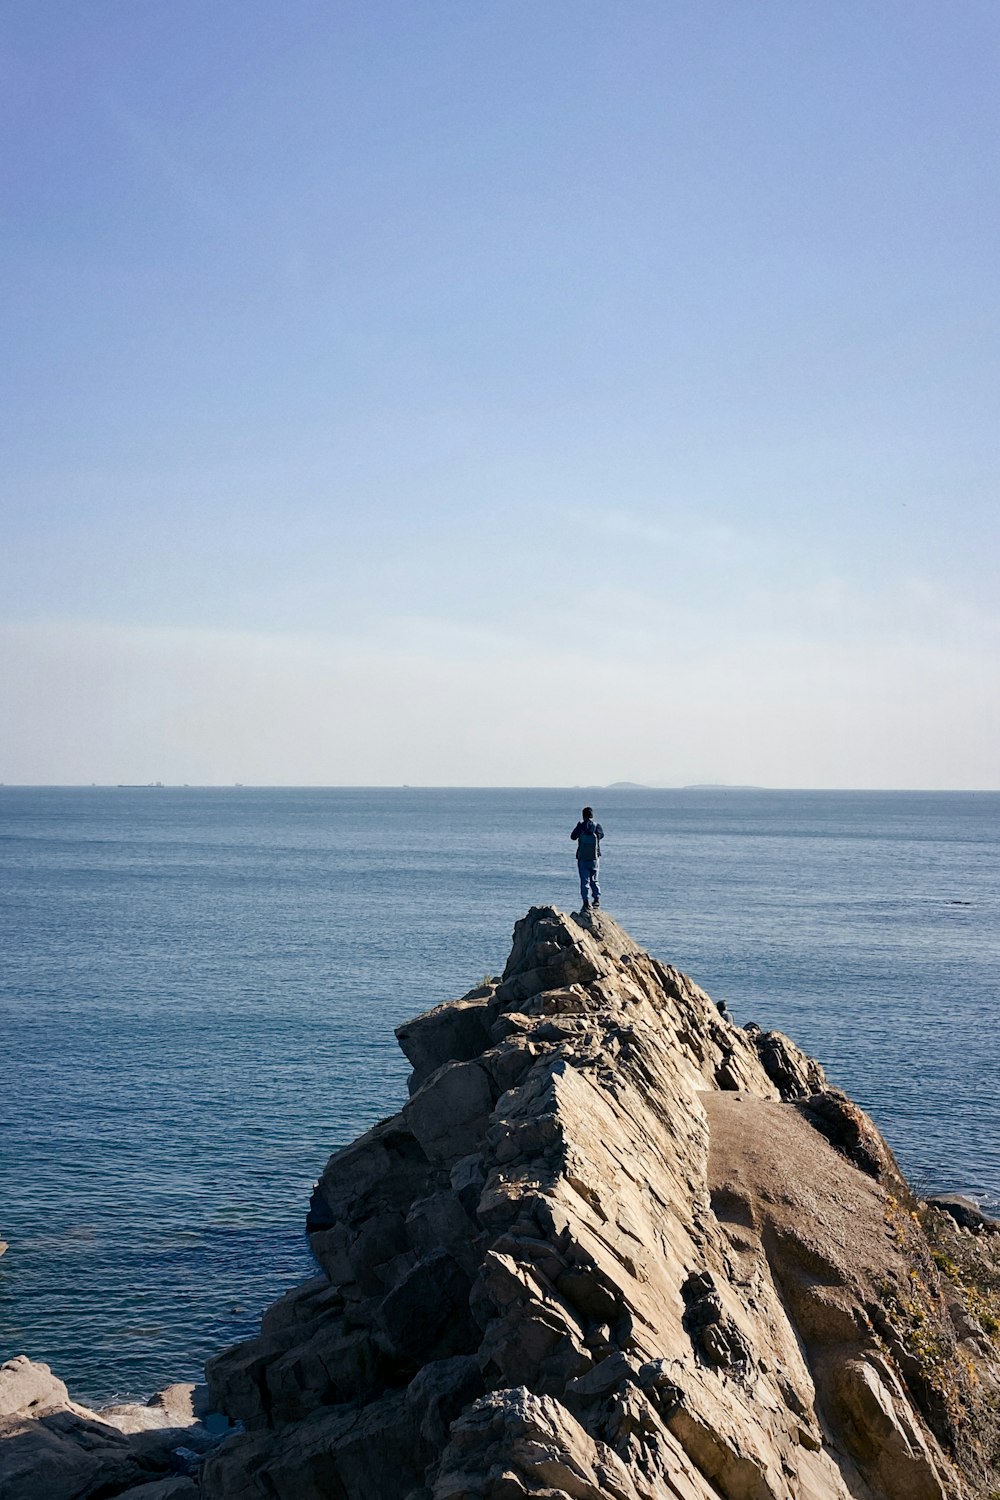 man standing on rock formation near body of water during daytime